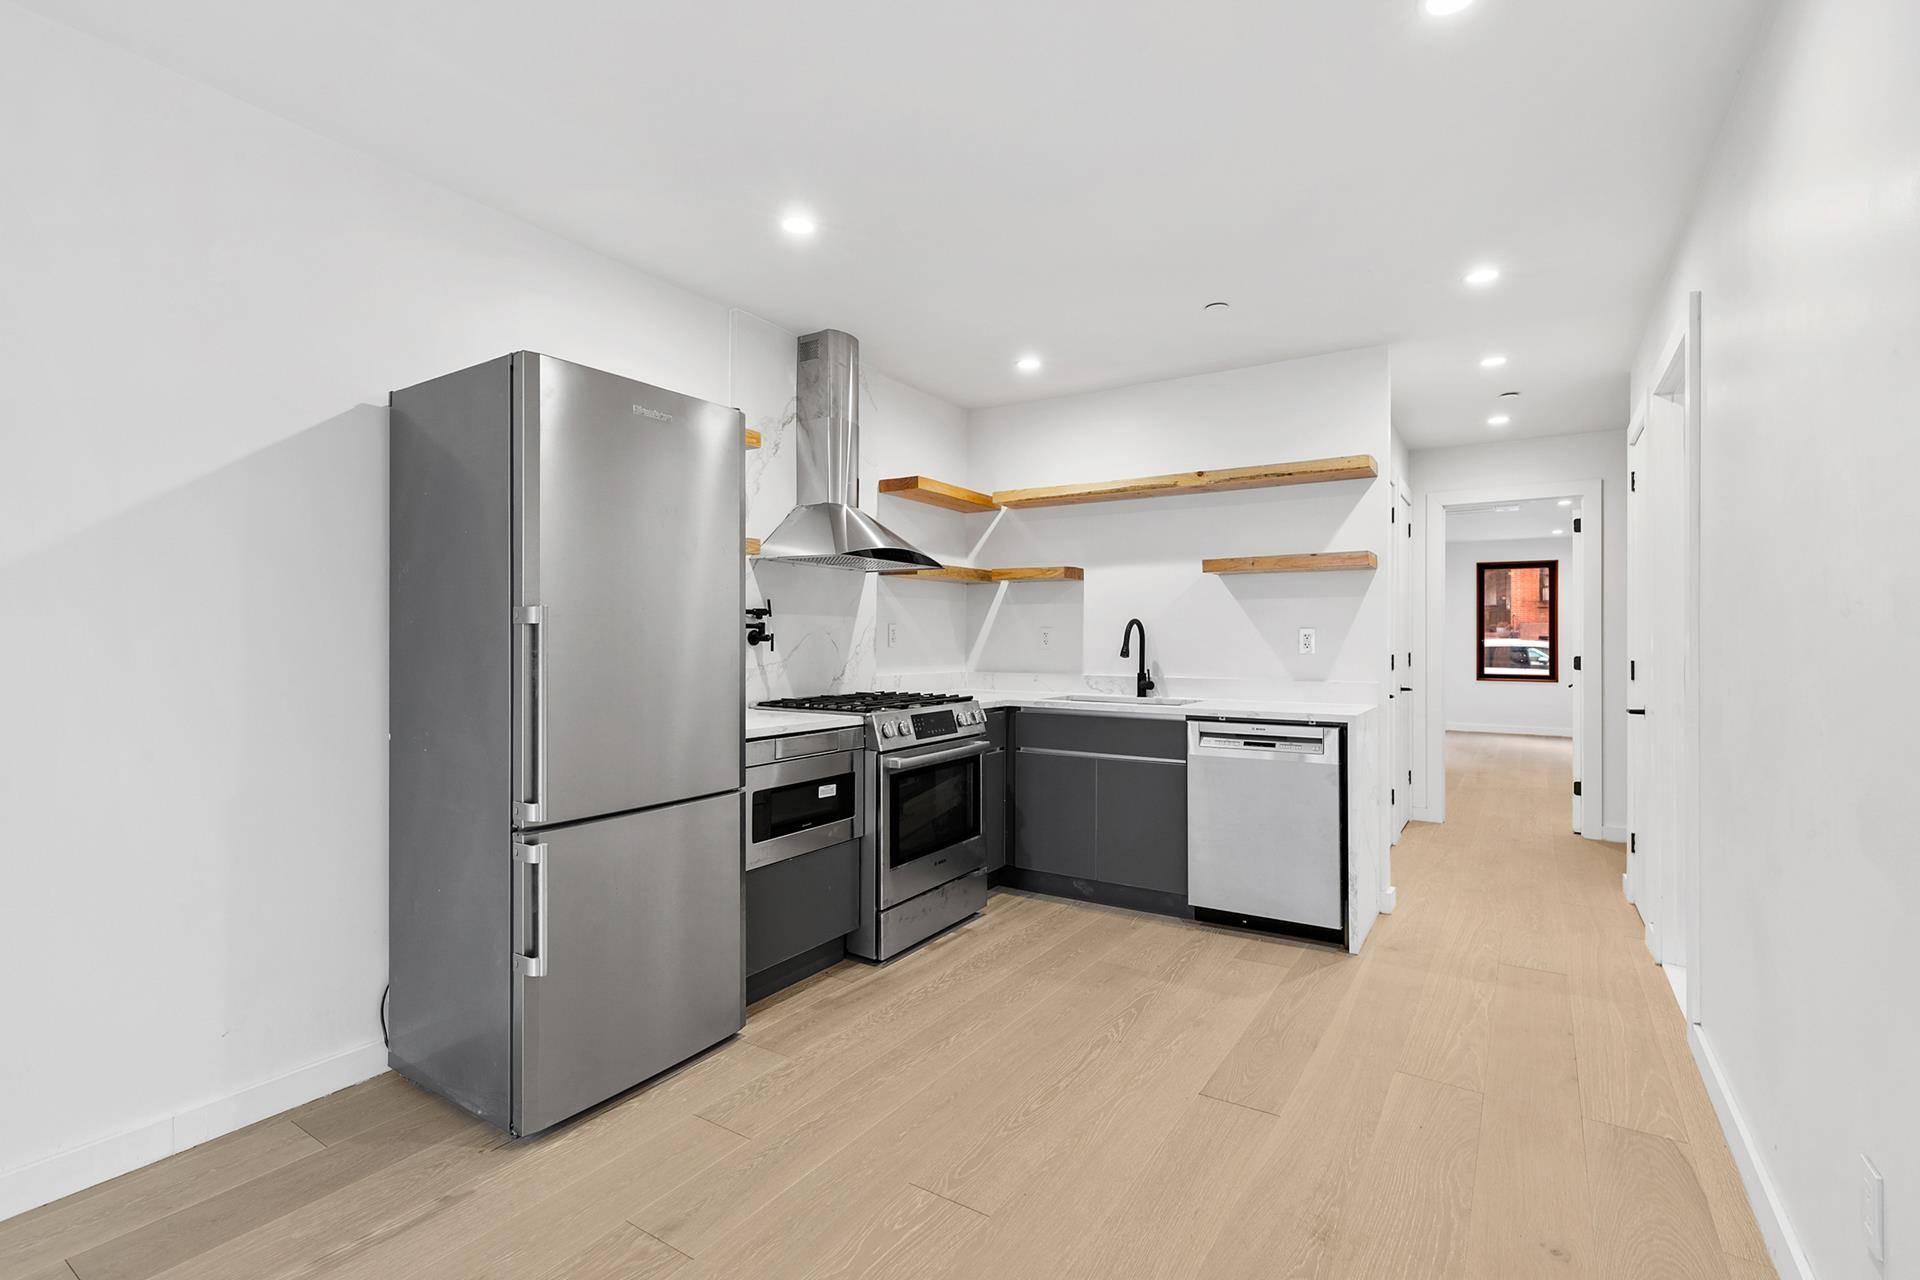 Welcome to 45 Duffield Street, a striking 22' wide, fully renovated 3 unit townhouse in the heart of Downtown Brooklyn.